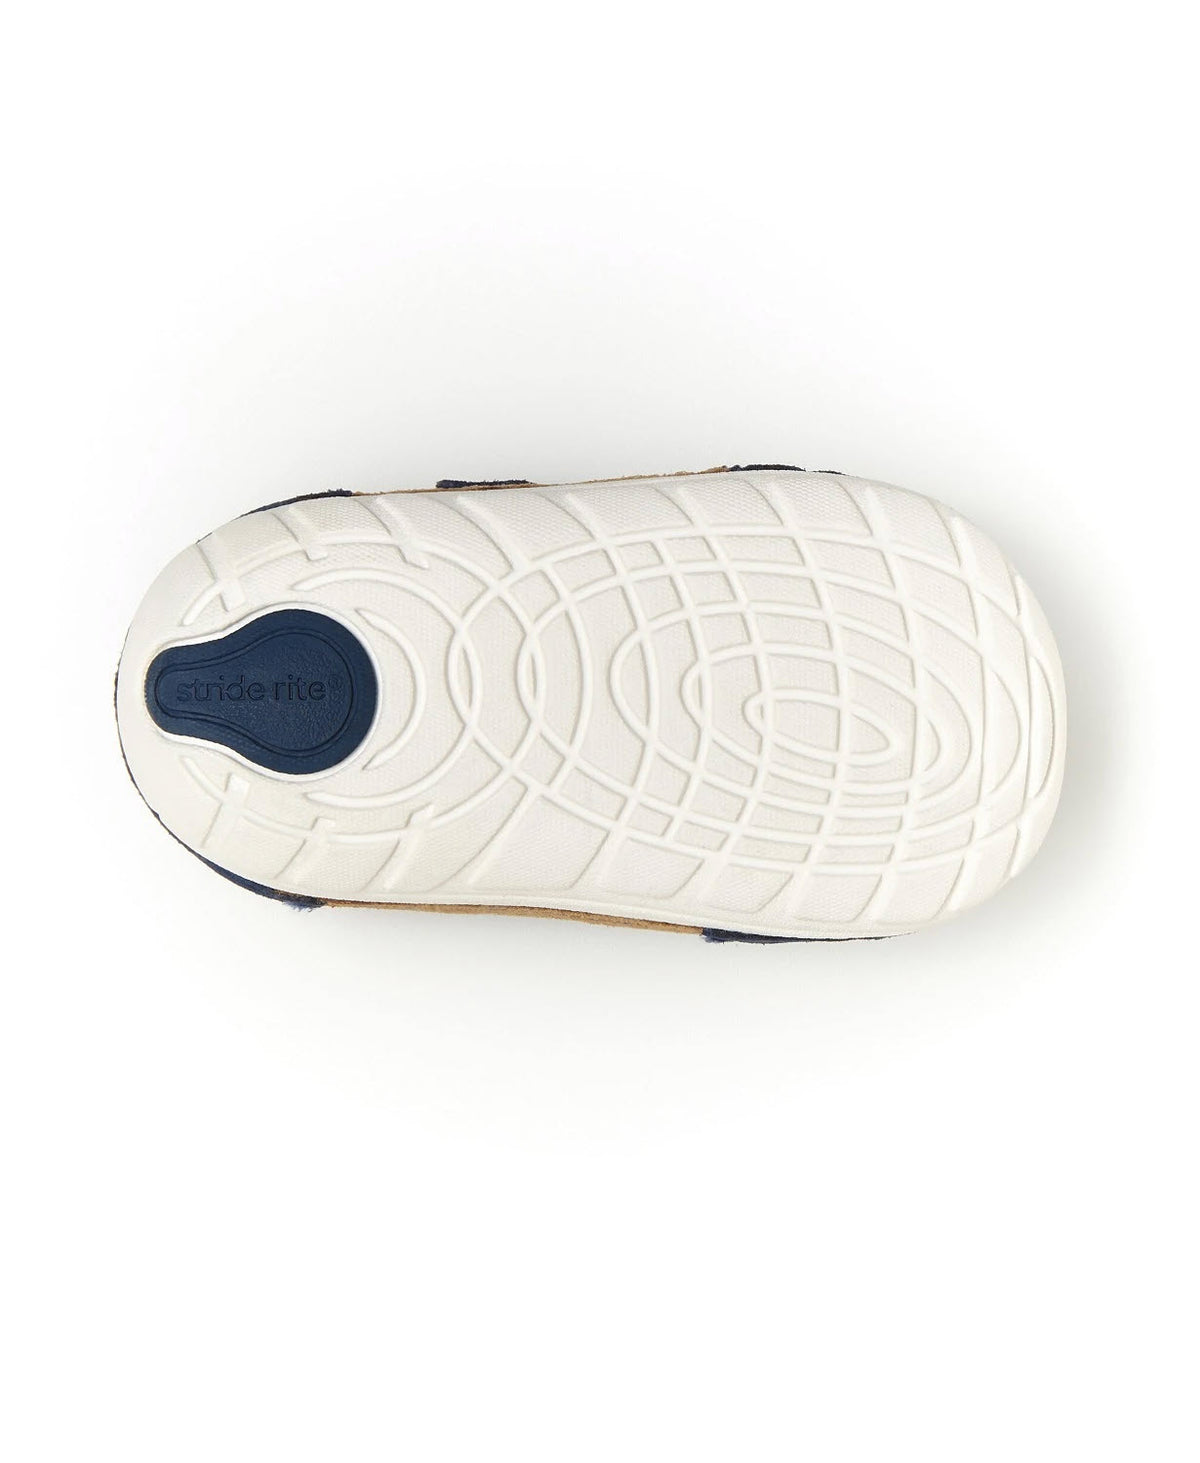 Bottom view of a Stride Rite Soft Motion Mason Navy/Truffle - Toddler shoe with a patterned tread and a label reading &quot;striderite.